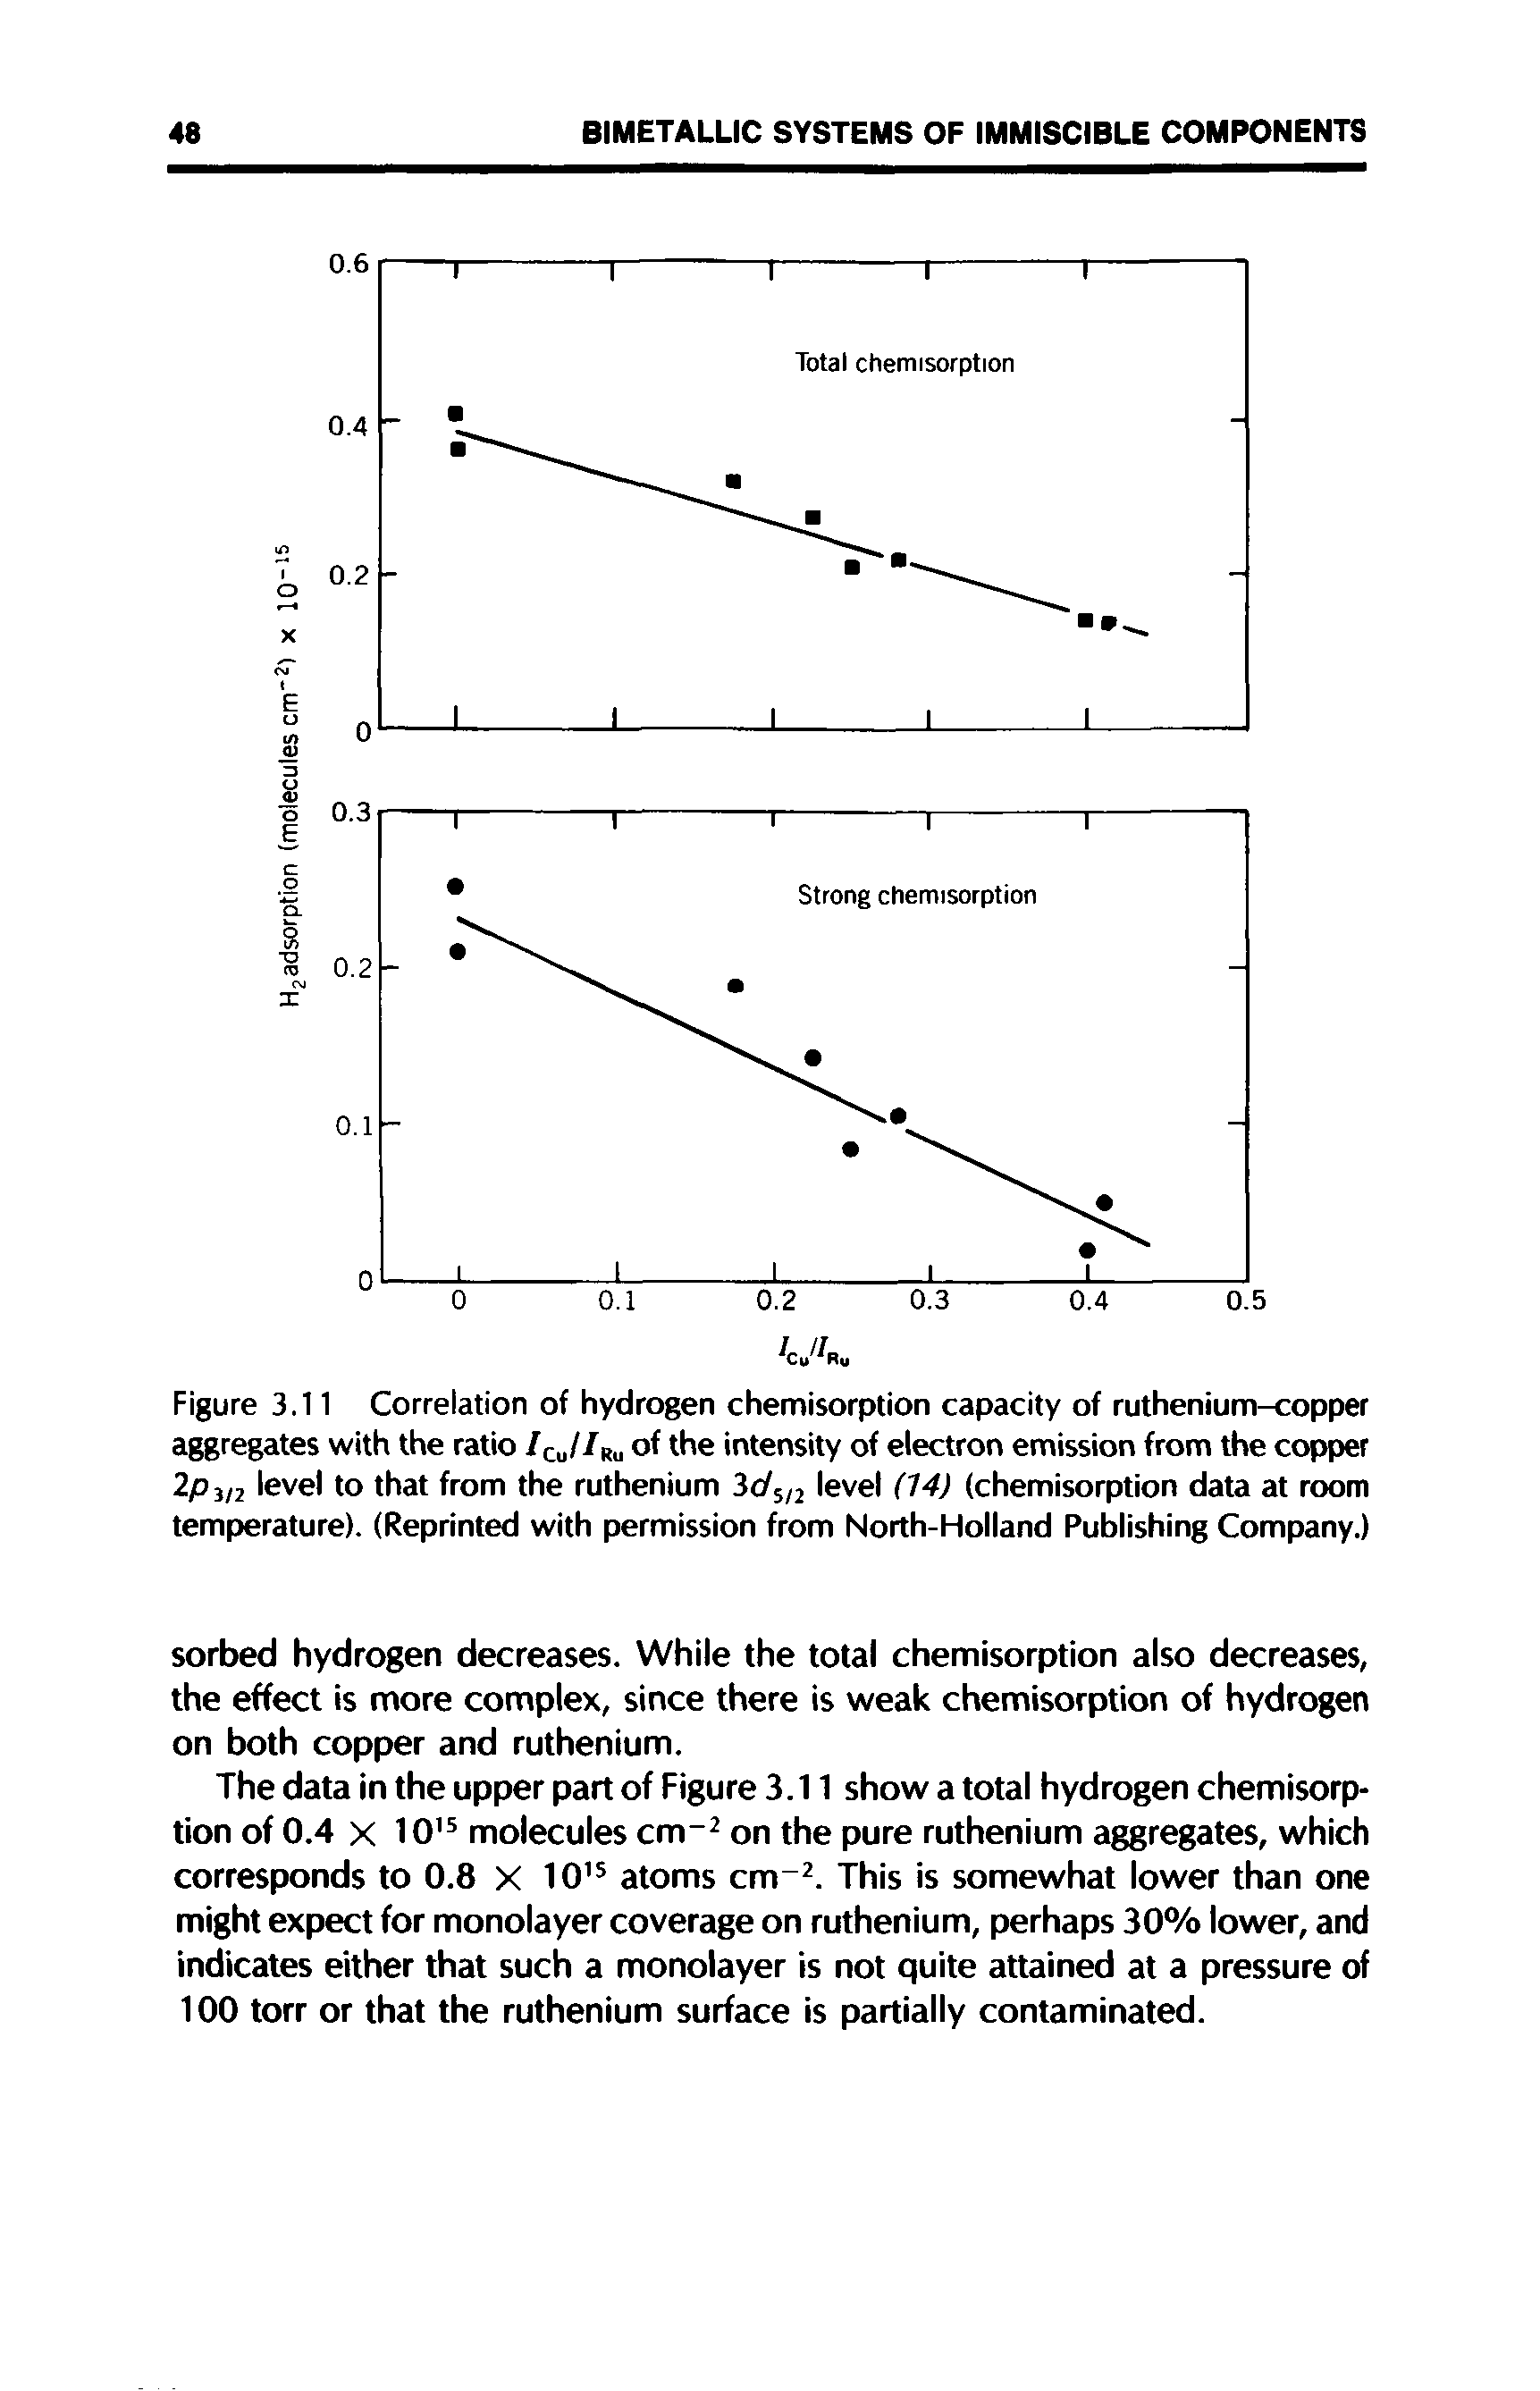 Figure 3.11 Correlation of hydrogen chemisorption capacity of ruthenium-copper aggregates with the ratio /c //Ru of the intensity of electron emission from the copper 2pm level to that from the ruthenium 3dsl2 level (14) (chemisorption data at room temperature). (Reprinted with permission from North-Holland Publishing Company.)...